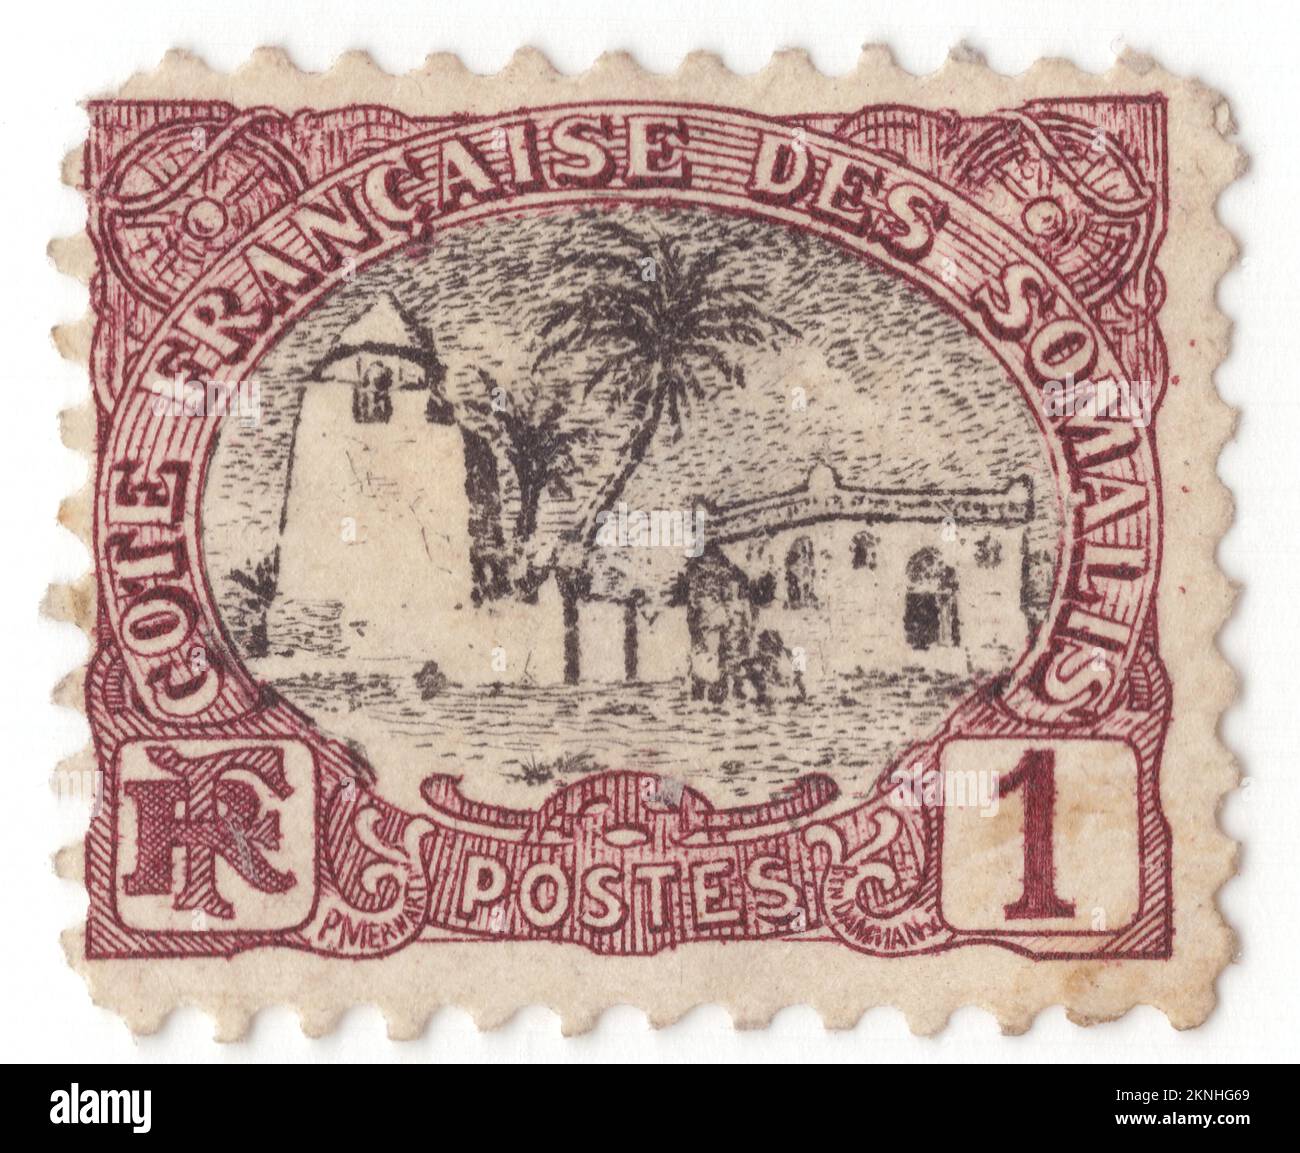 FRENCH SOMALI COAST DJIBOUTI - 1903: An 1 centime brown-violet and orange postage stamp depicting Tadjoura Mosque. Tadjoura is one of the oldest towns in Djibouti and the capital of the Tadjourah Region. The town evolved into an early Islamic center with the arrival of Muslims shortly after the Hijra. An important port for many centuries, it was ruled by a succession of polities, including the Ifat Sultanate, Adal Sultanate, the Ottoman Empire, France until Djibouti's independence in 1977. Lying on the Gulf of Tadjoura, it is home to a population of around 45,000 inhabitants Stock Photo